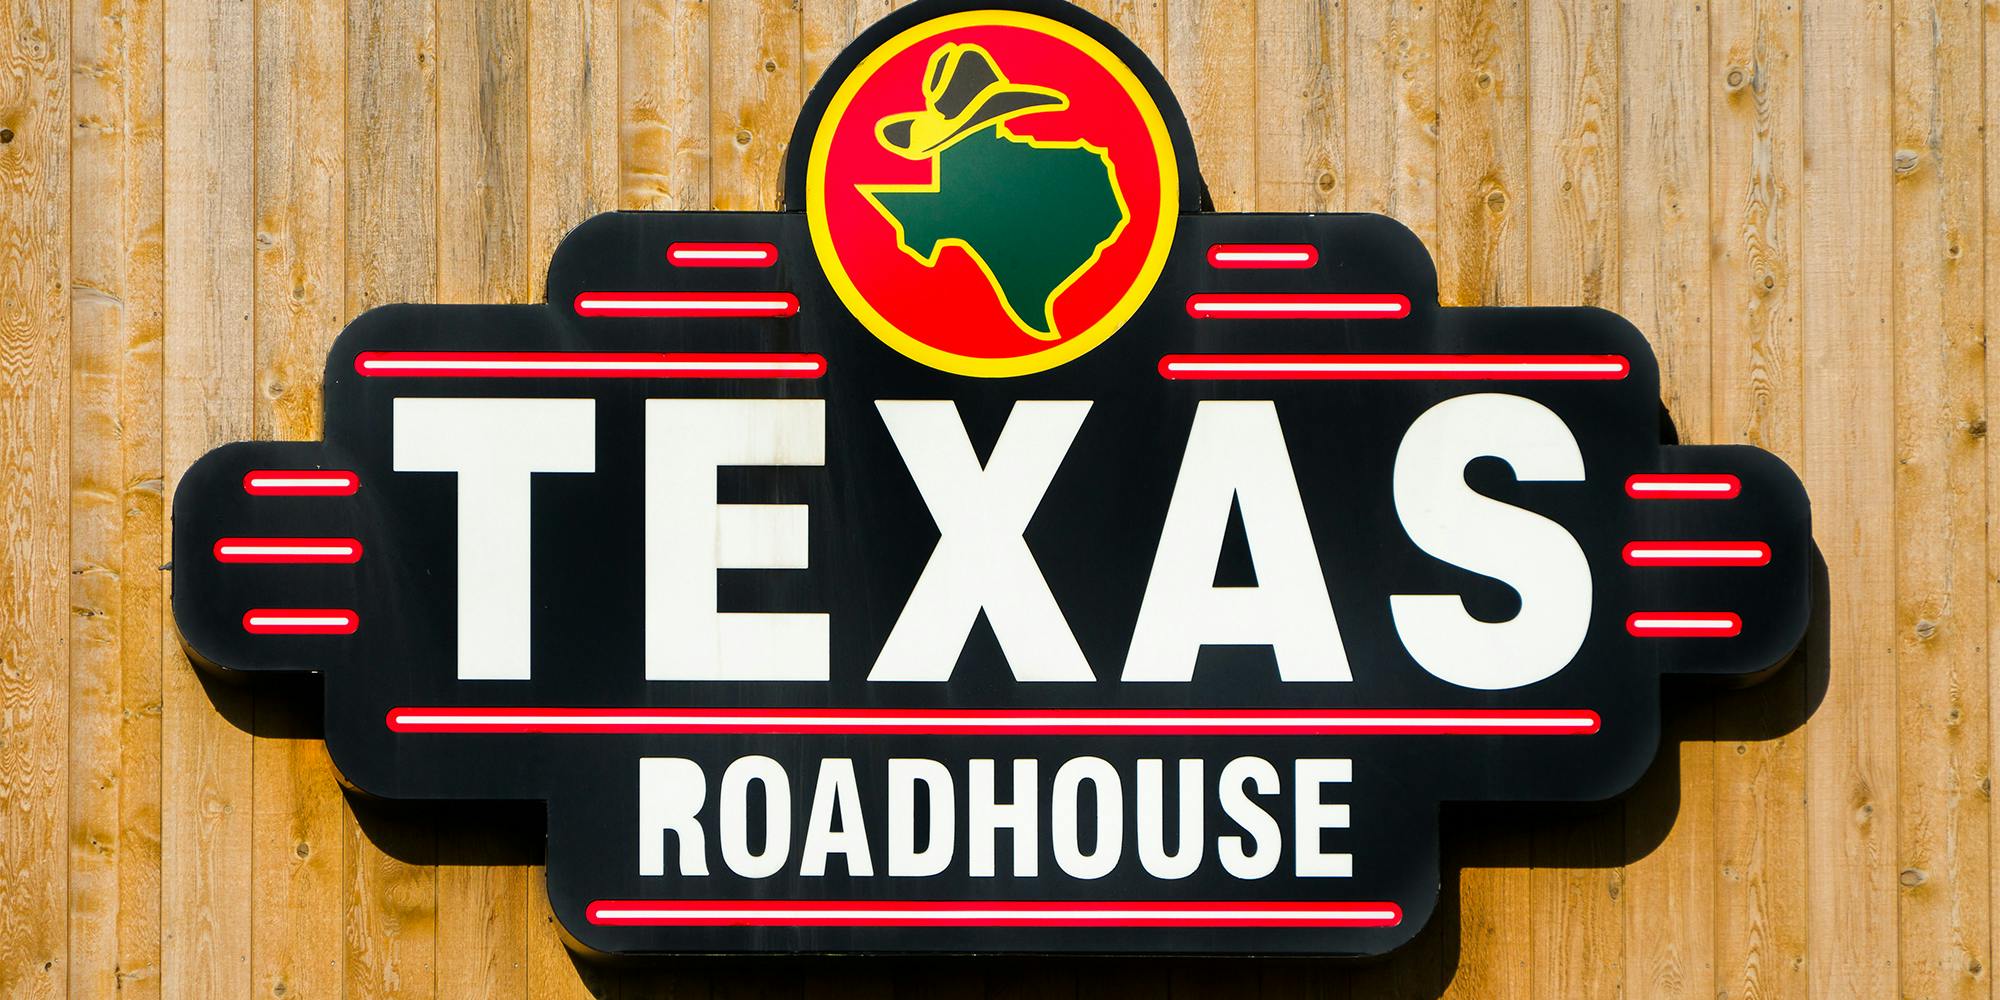 Texas Roadhouse exterior sign and logo